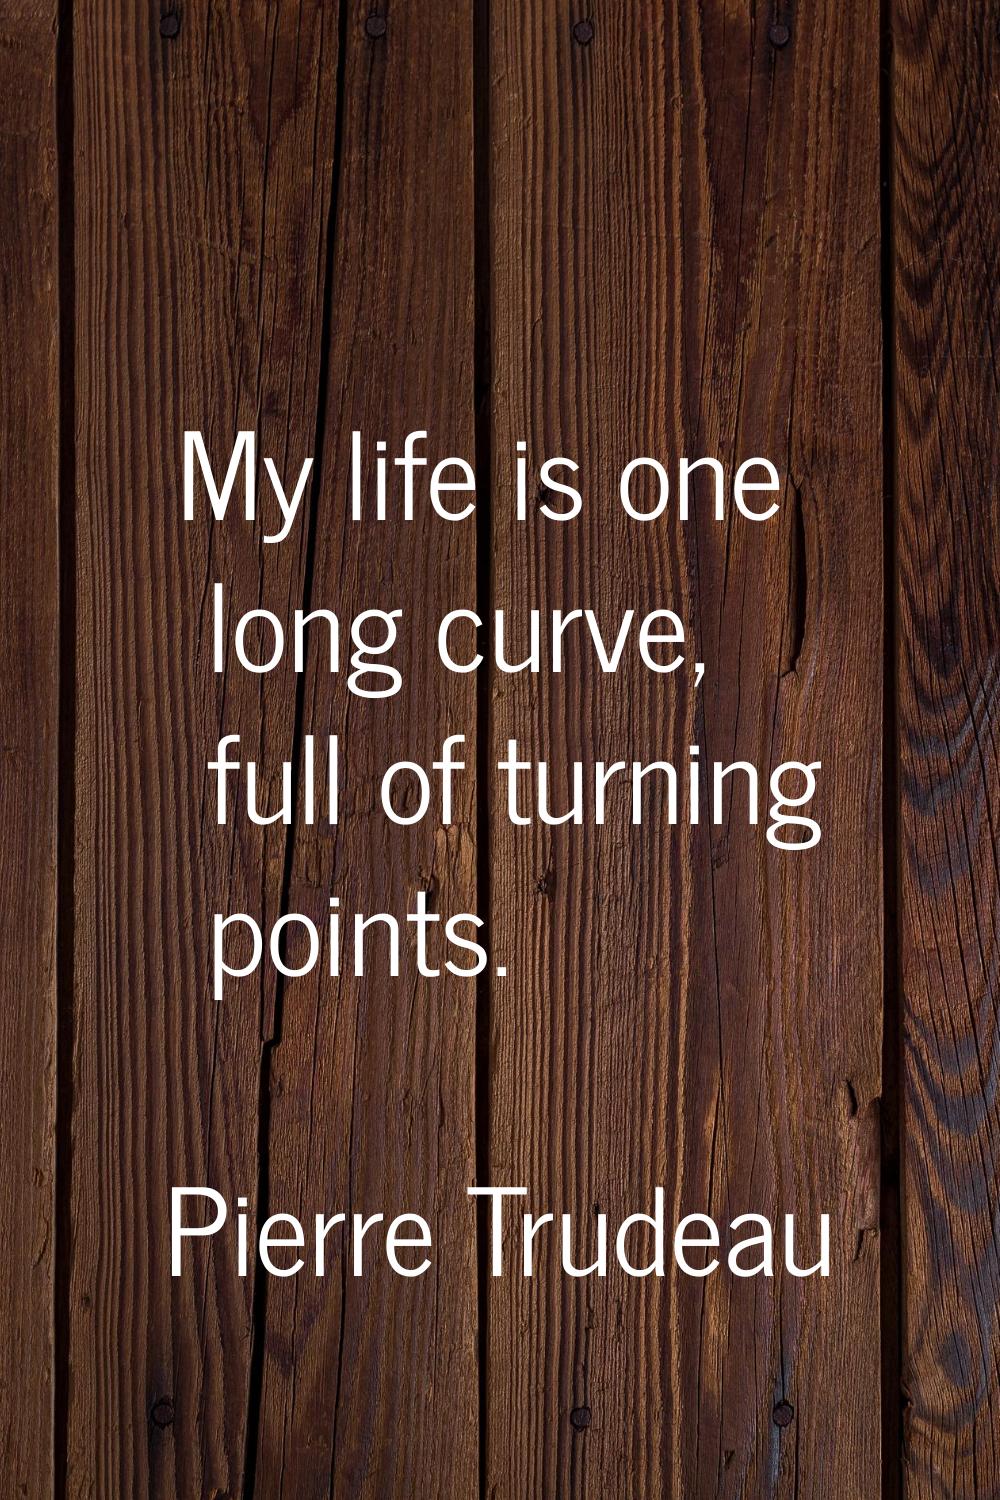 My life is one long curve, full of turning points.